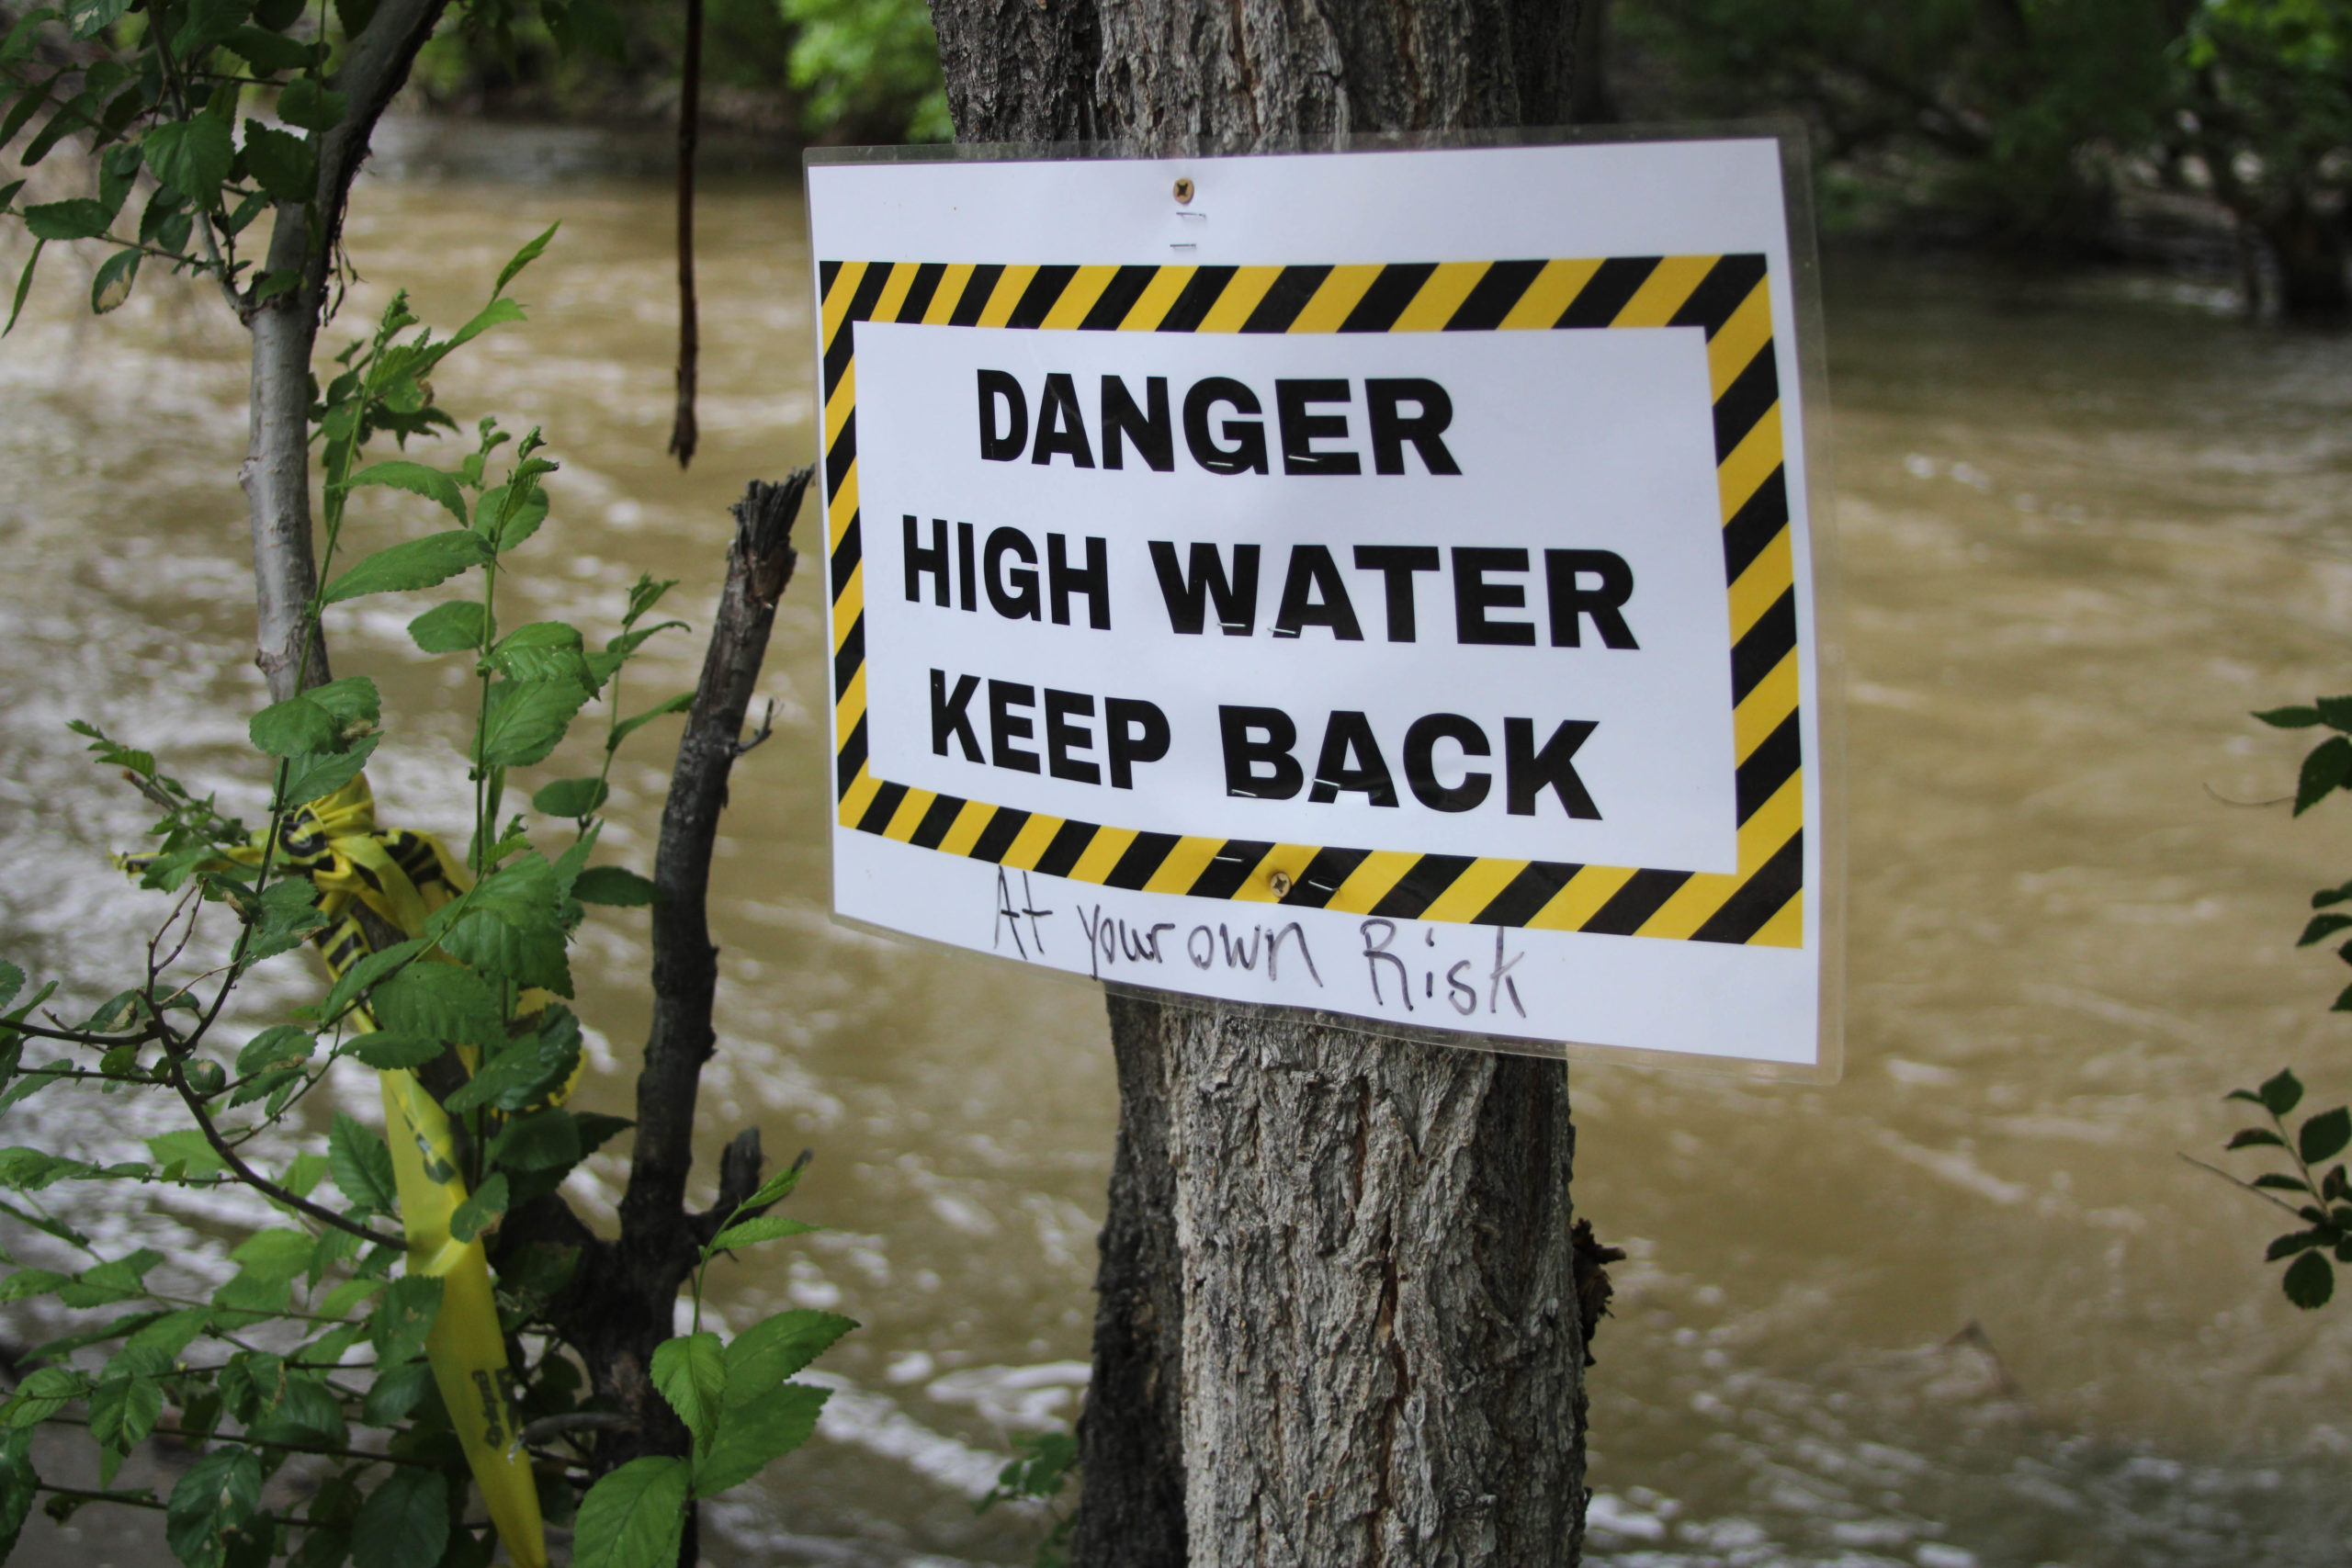 Signs advising visitors to stay back from the rushing, high waters of the Ogden River.